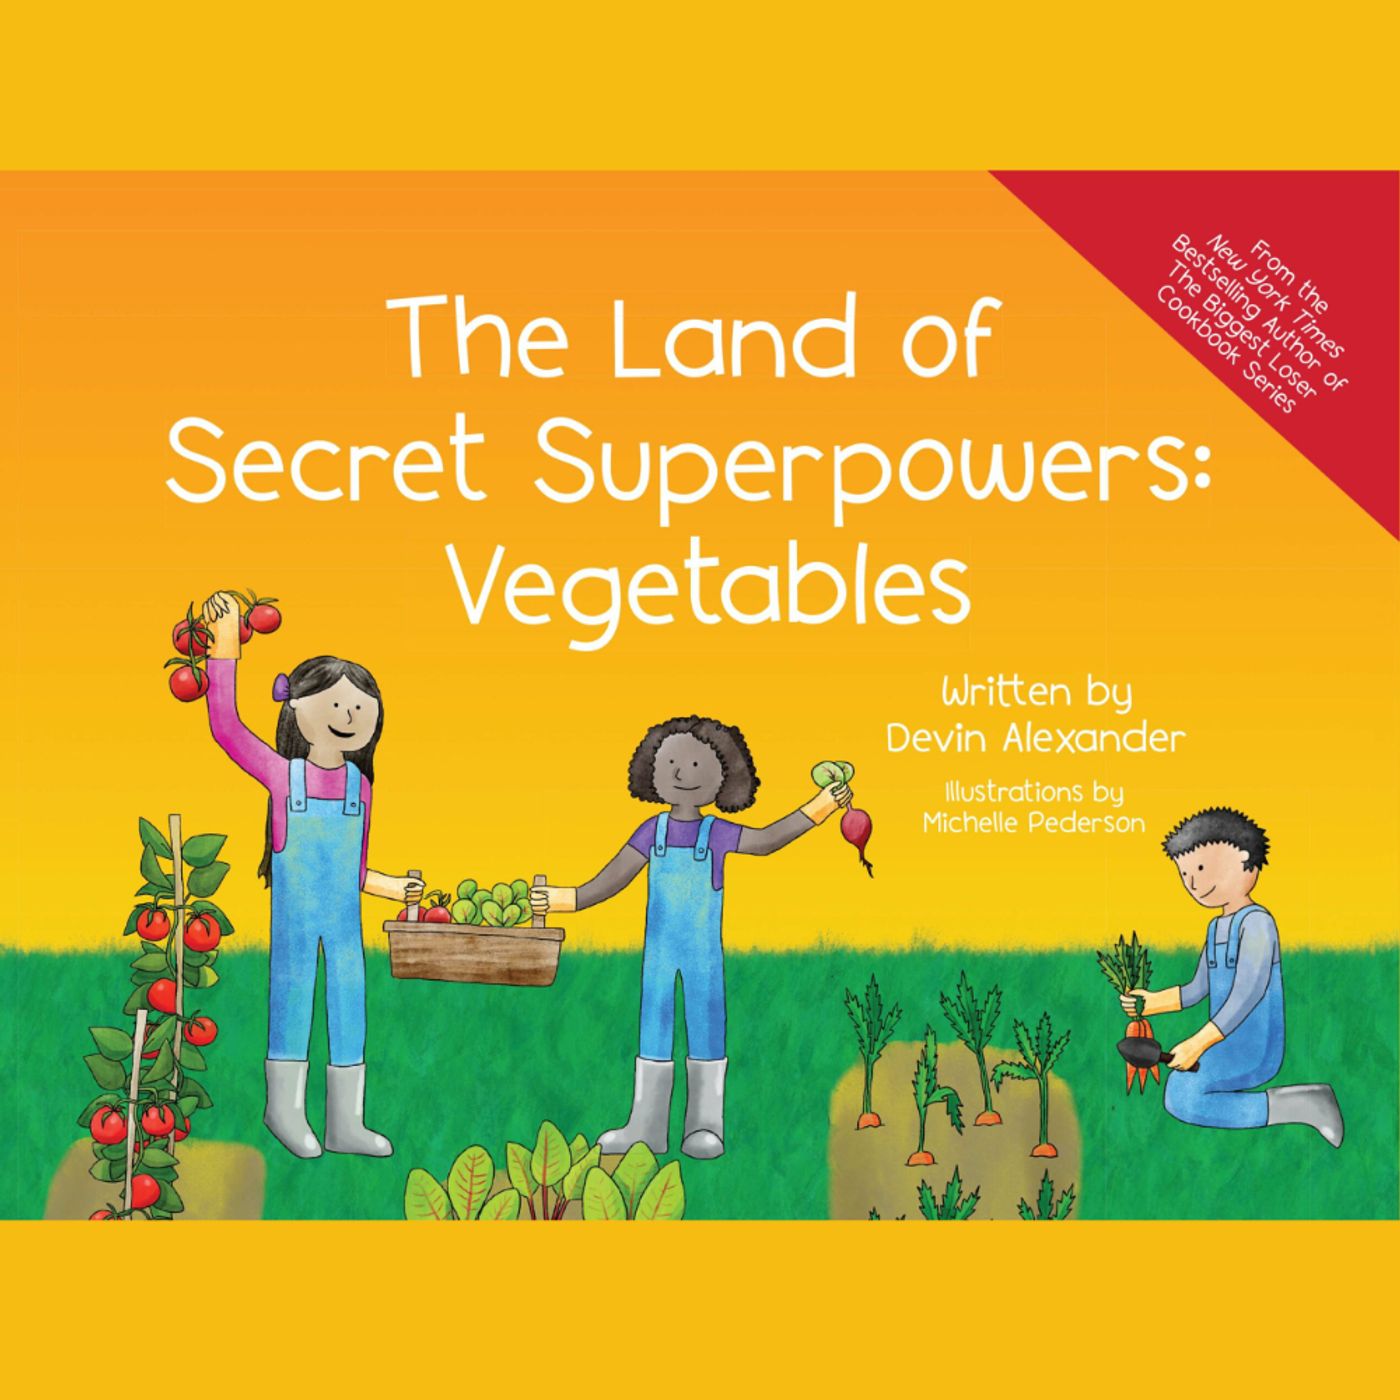 The Biggest Loser Chef Devin Alexander, Author of The Land Of Secret Superpowers: Vegetables